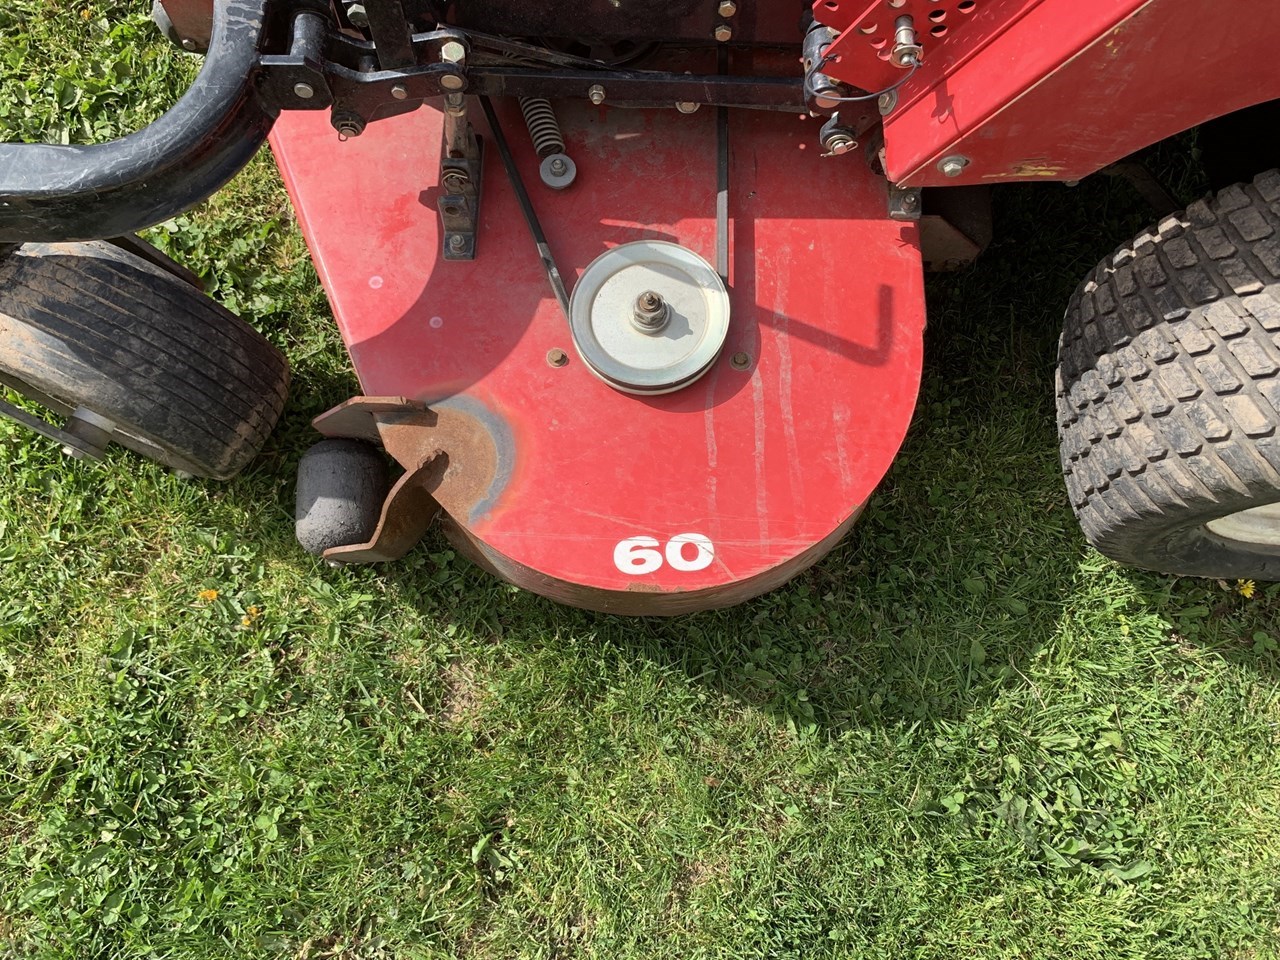 Country Clipper Boss XL Zero Turn Mower For Sale